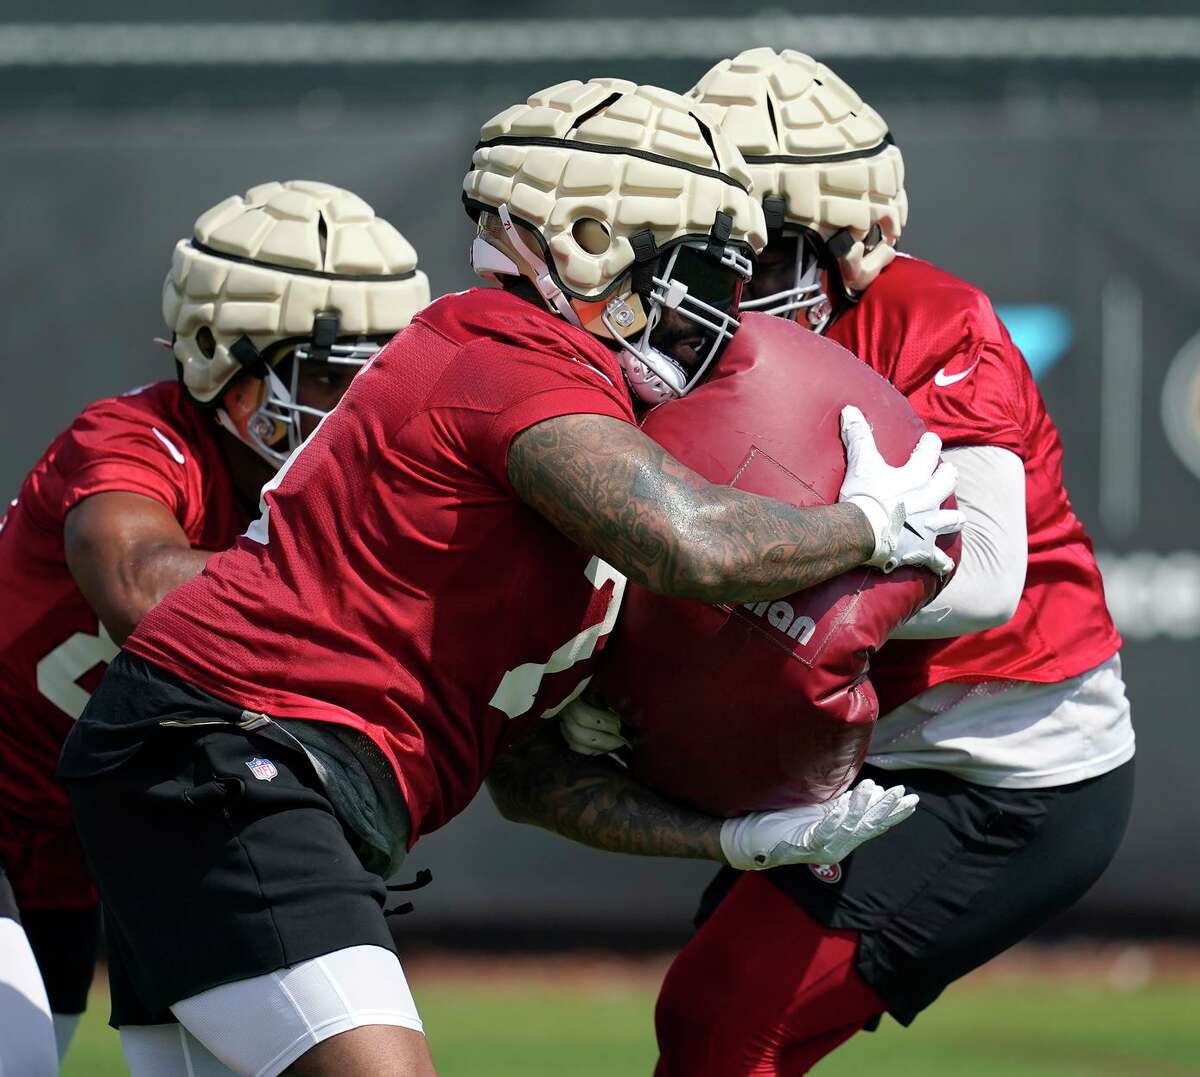 In 2021, 49ers tackle Trent Williams (middle) didn’t allow a sack and earned the highest grade given to a player (97.8) by Pro Football Focus since the site launched its grading system in 2006.